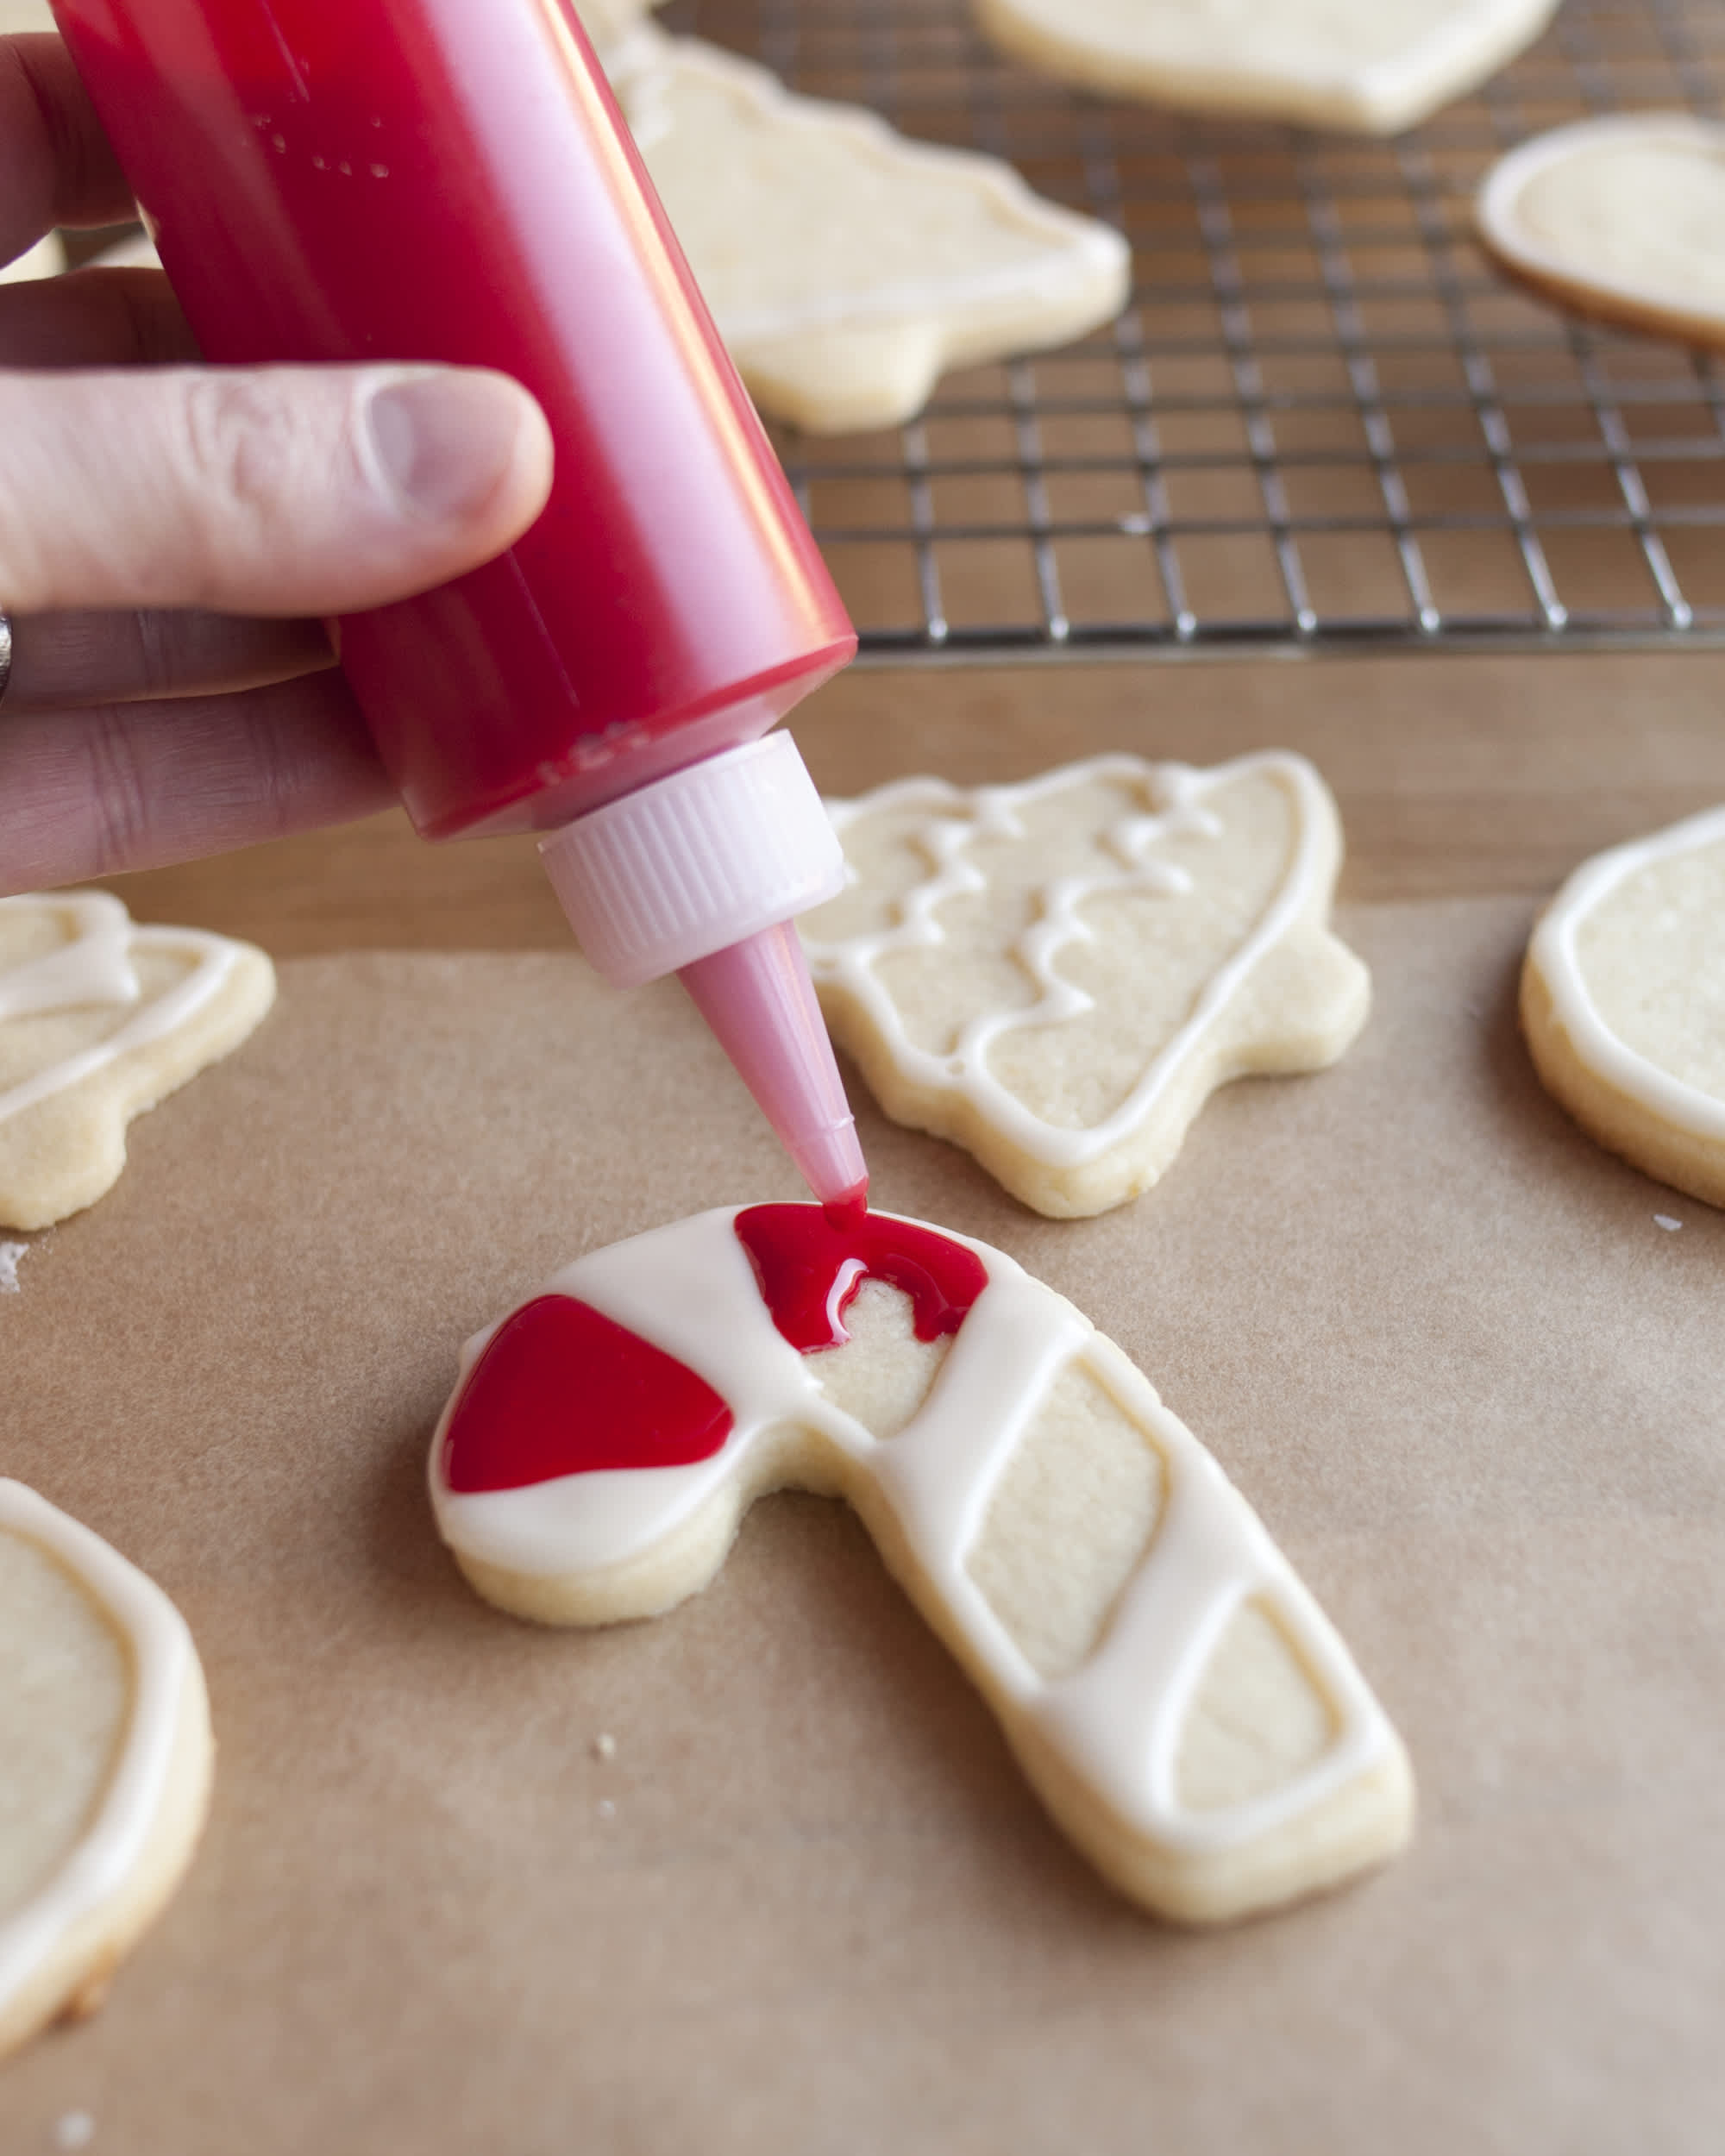 How To Decorate Cookies with Icing: The Easiest Method